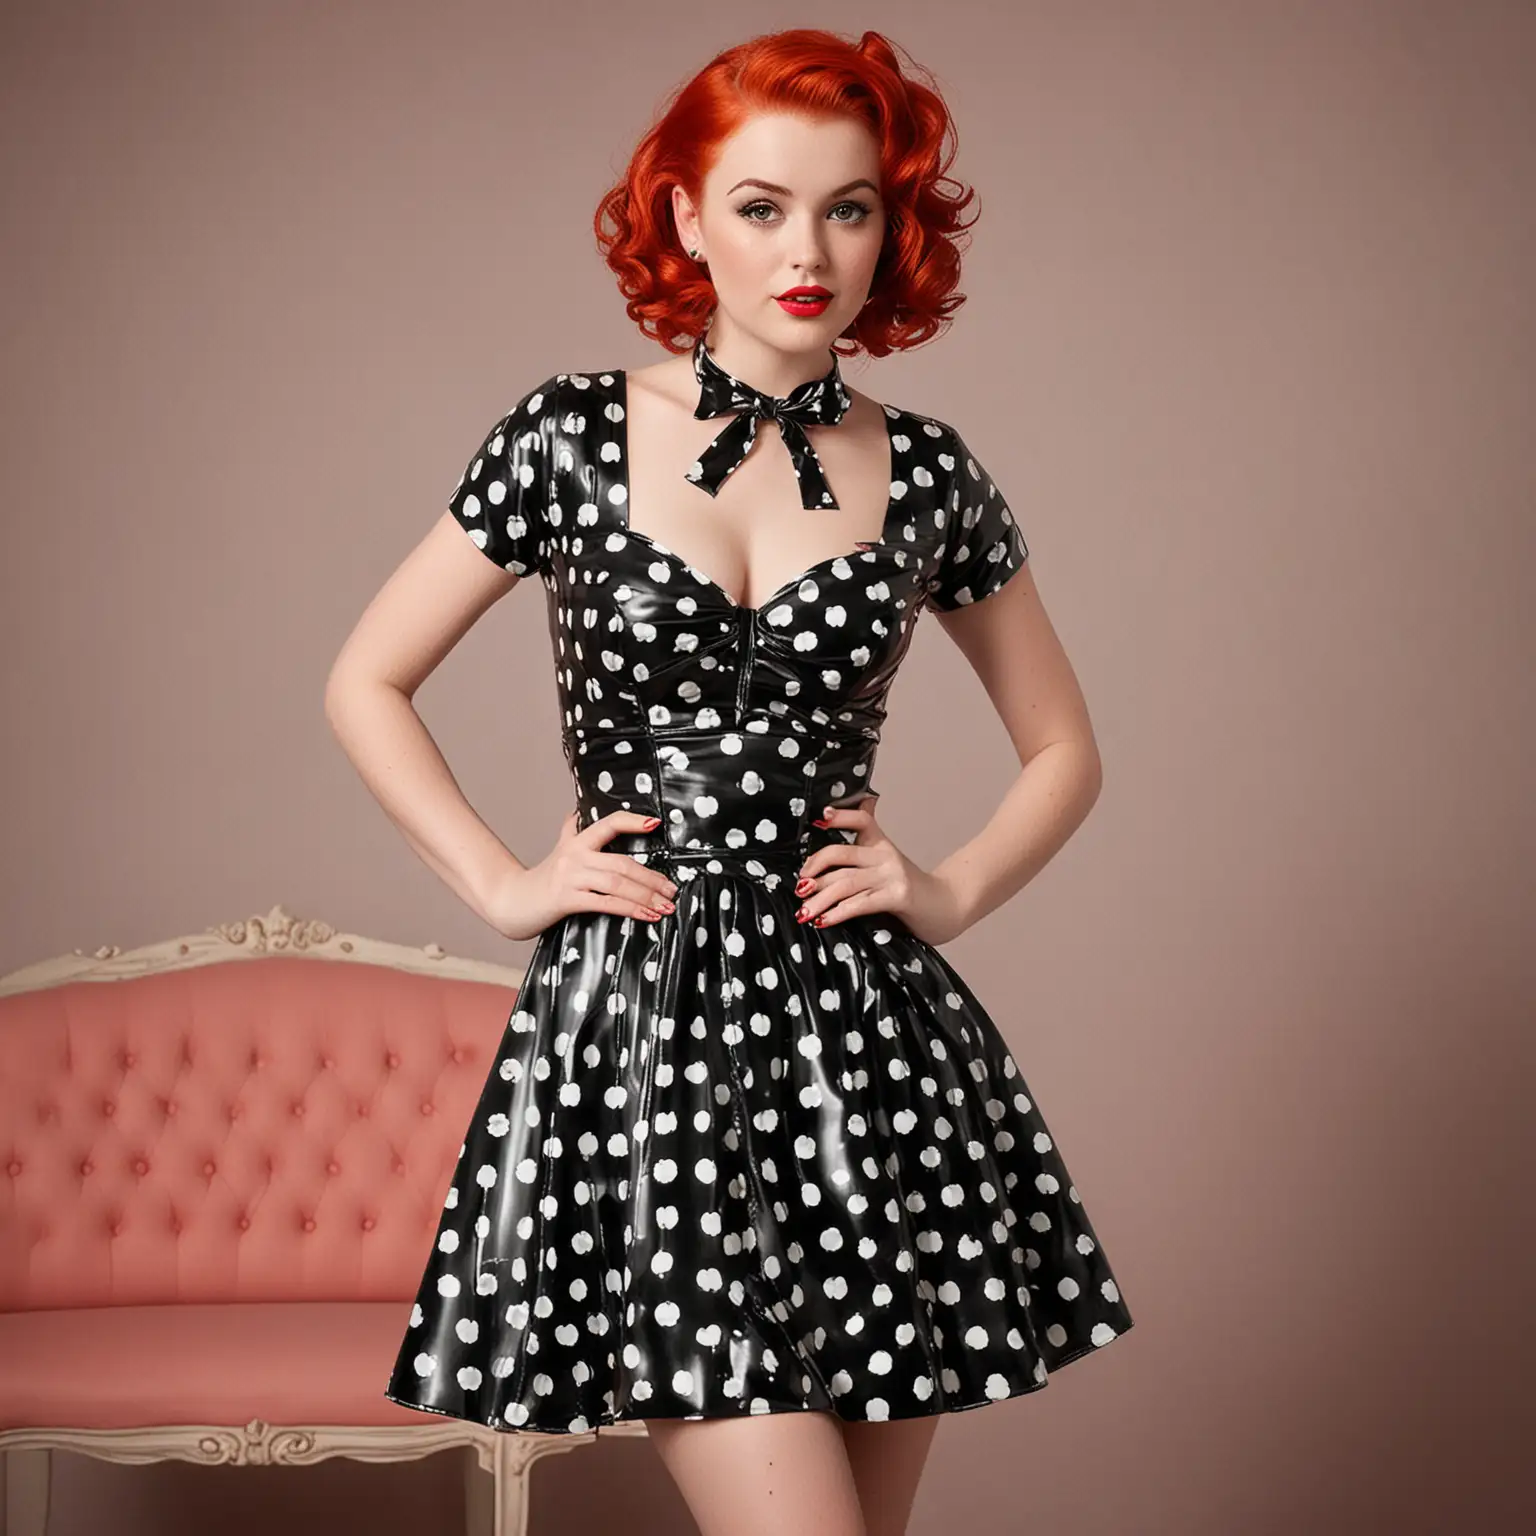 Playful Polka Dot Latex Dress with Plunging Neckline and Flared Skirt